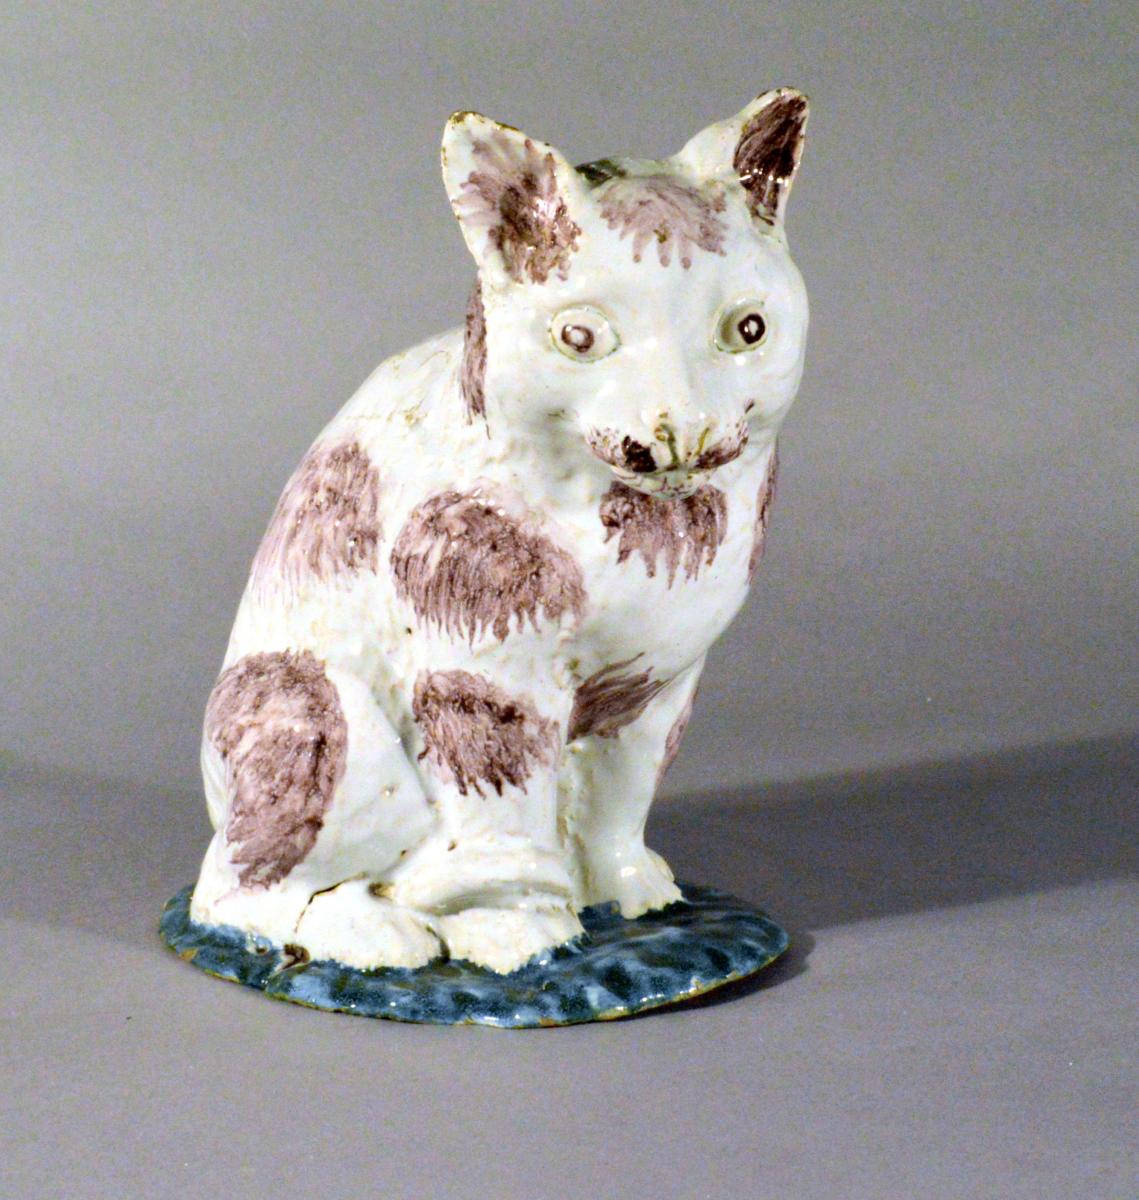 Brussels Faience Model of a Cat, Philippe Mombaers, Circa 1765-85.